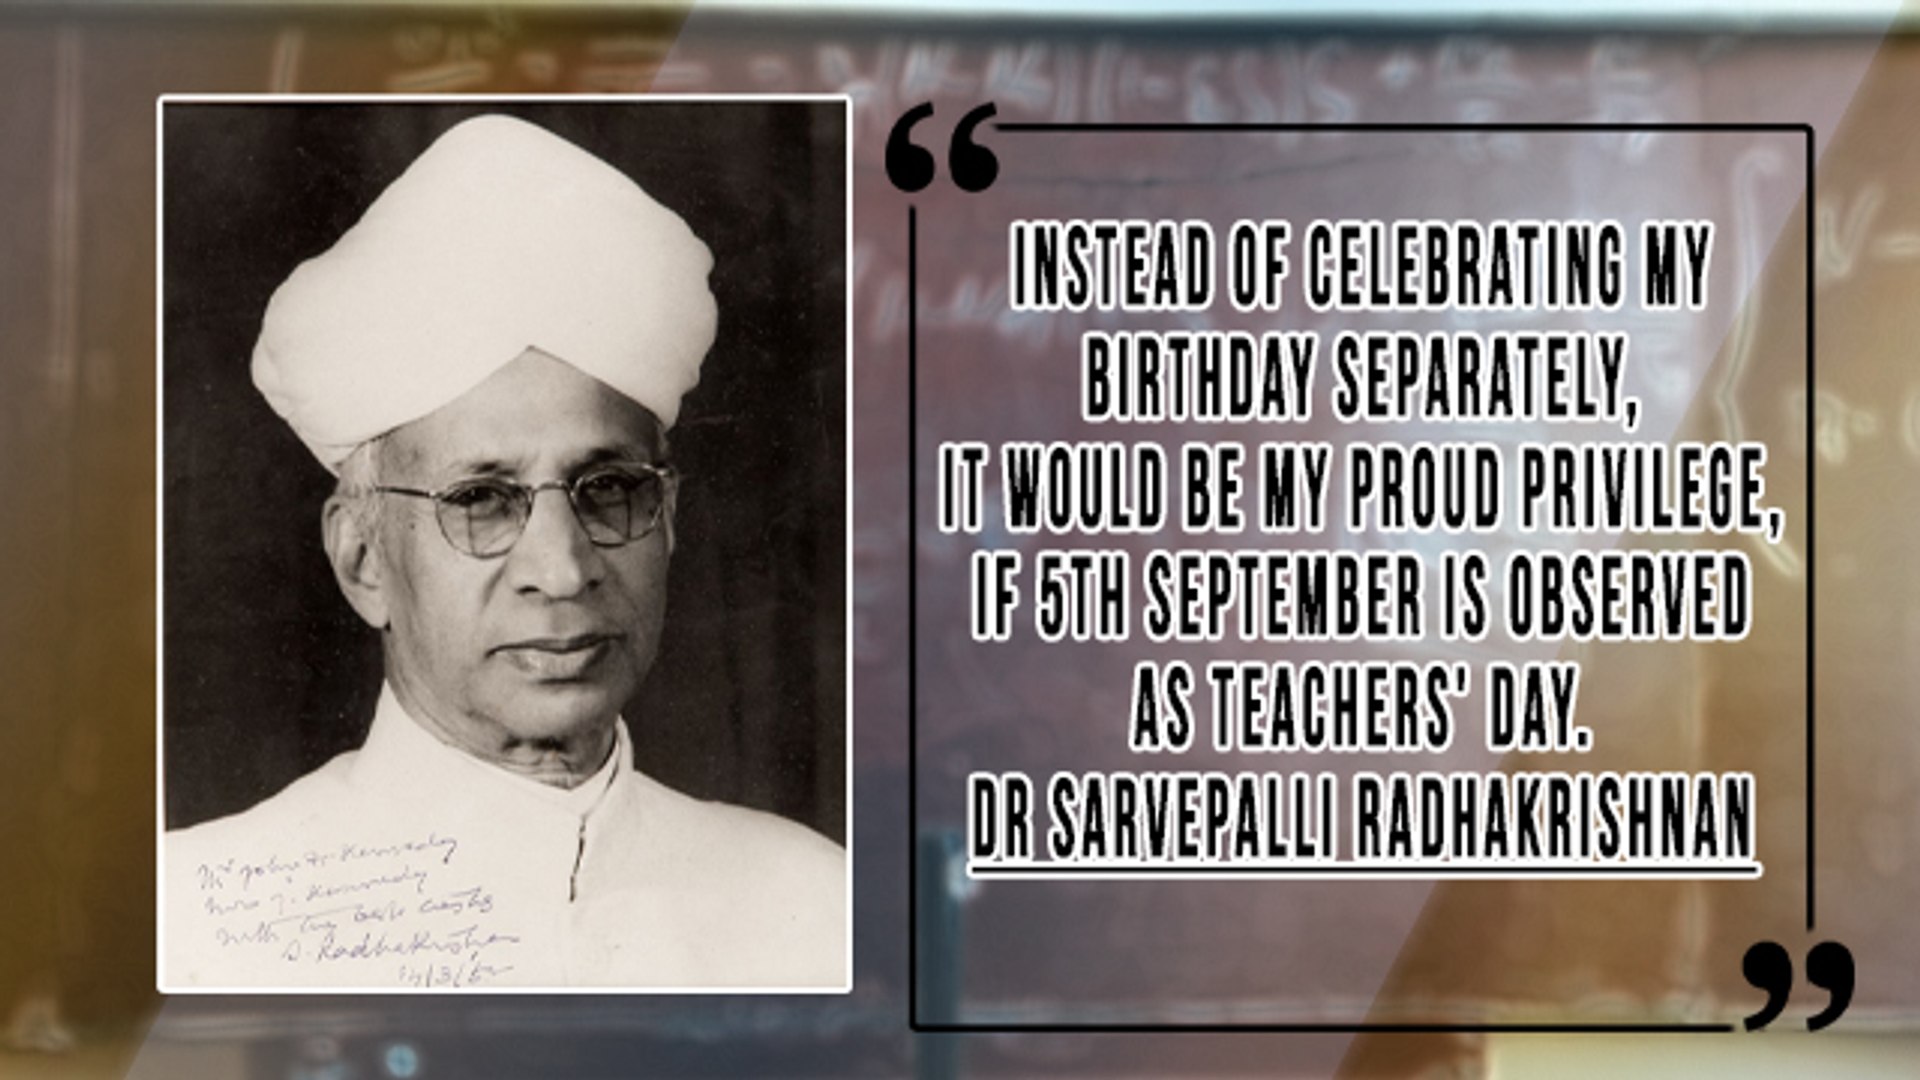 Teacher's Day 2019: Quotes By Great Personalities - video Dailymotion